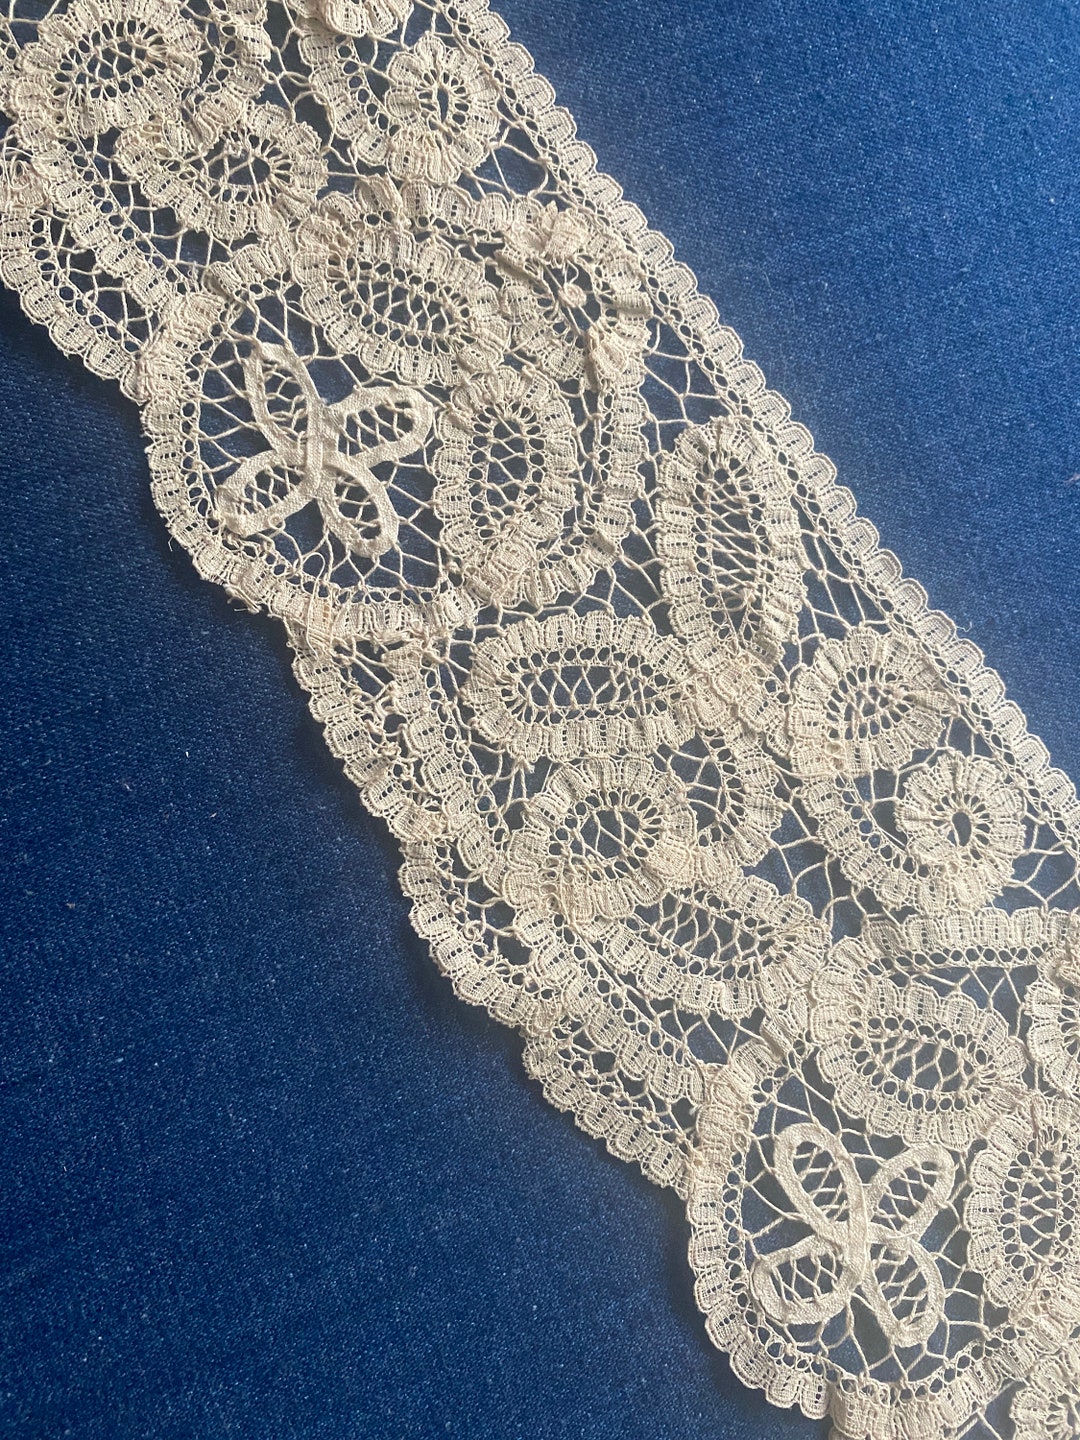 Hand Made Lace With Embroidered Fillings - Etsy